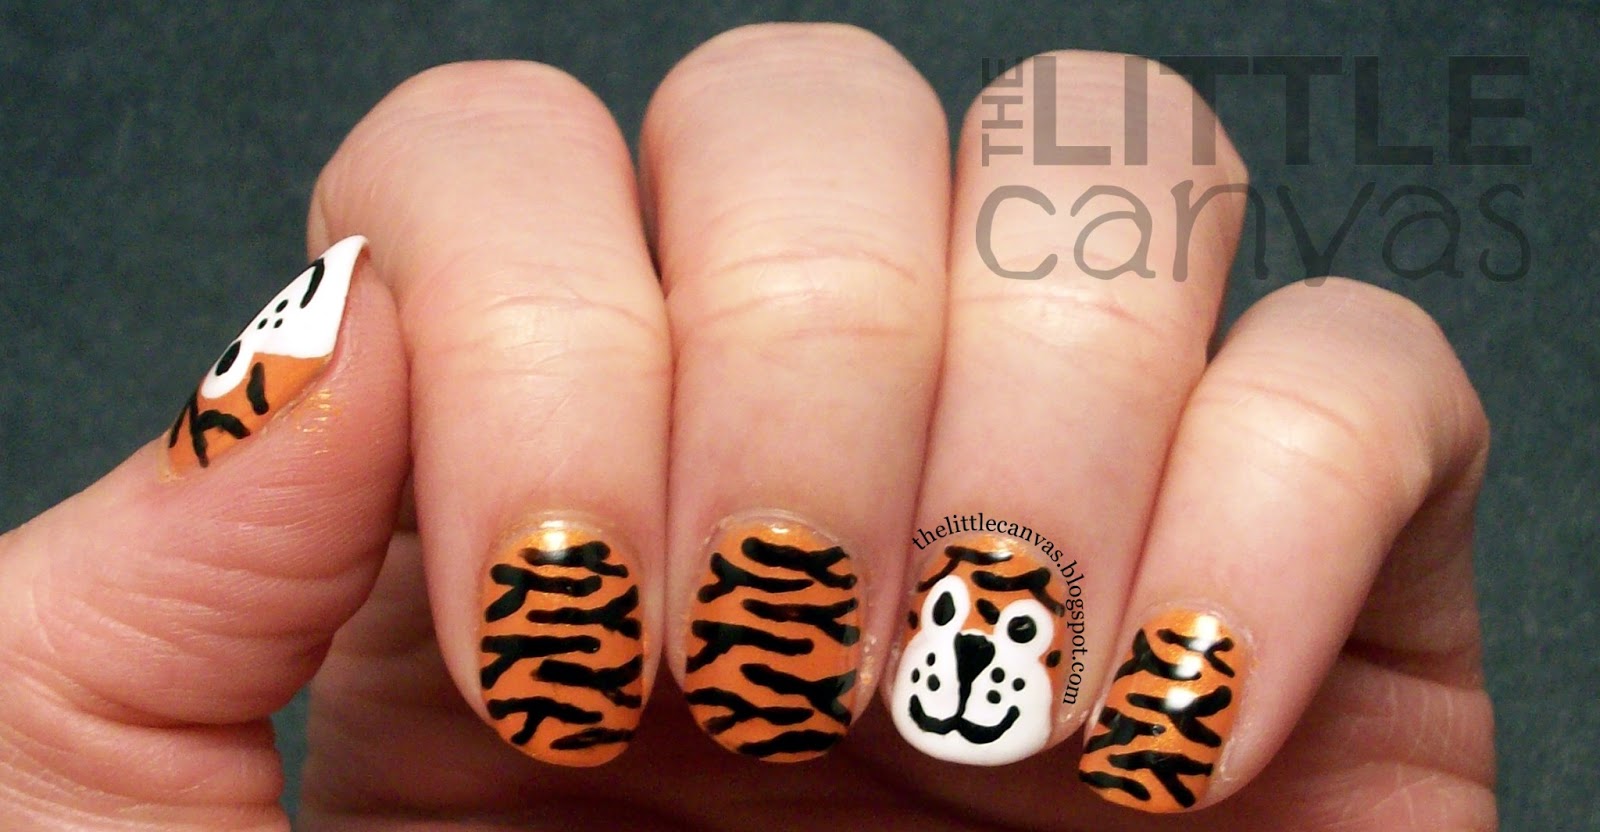 1. "Tiger Nail Art Tutorial on Dailymotion" - wide 8